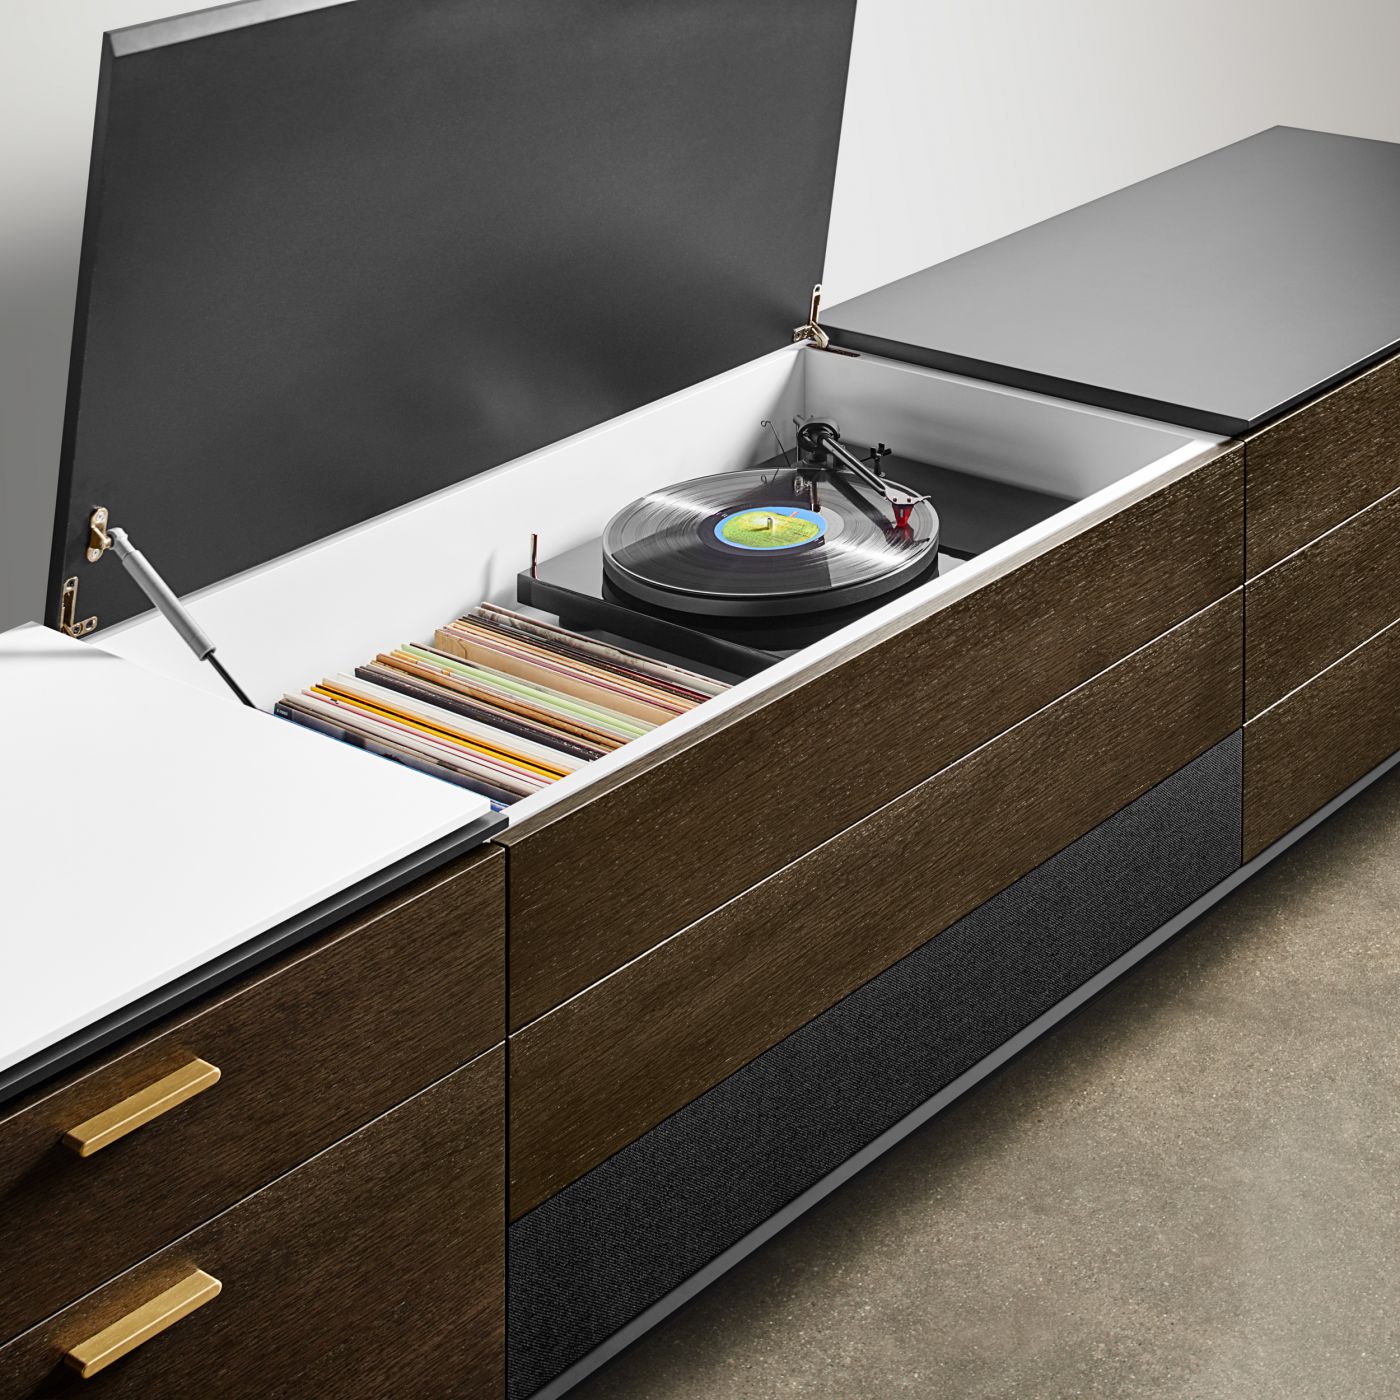 Halo's integrated turntable and speaker system are simply perfect.